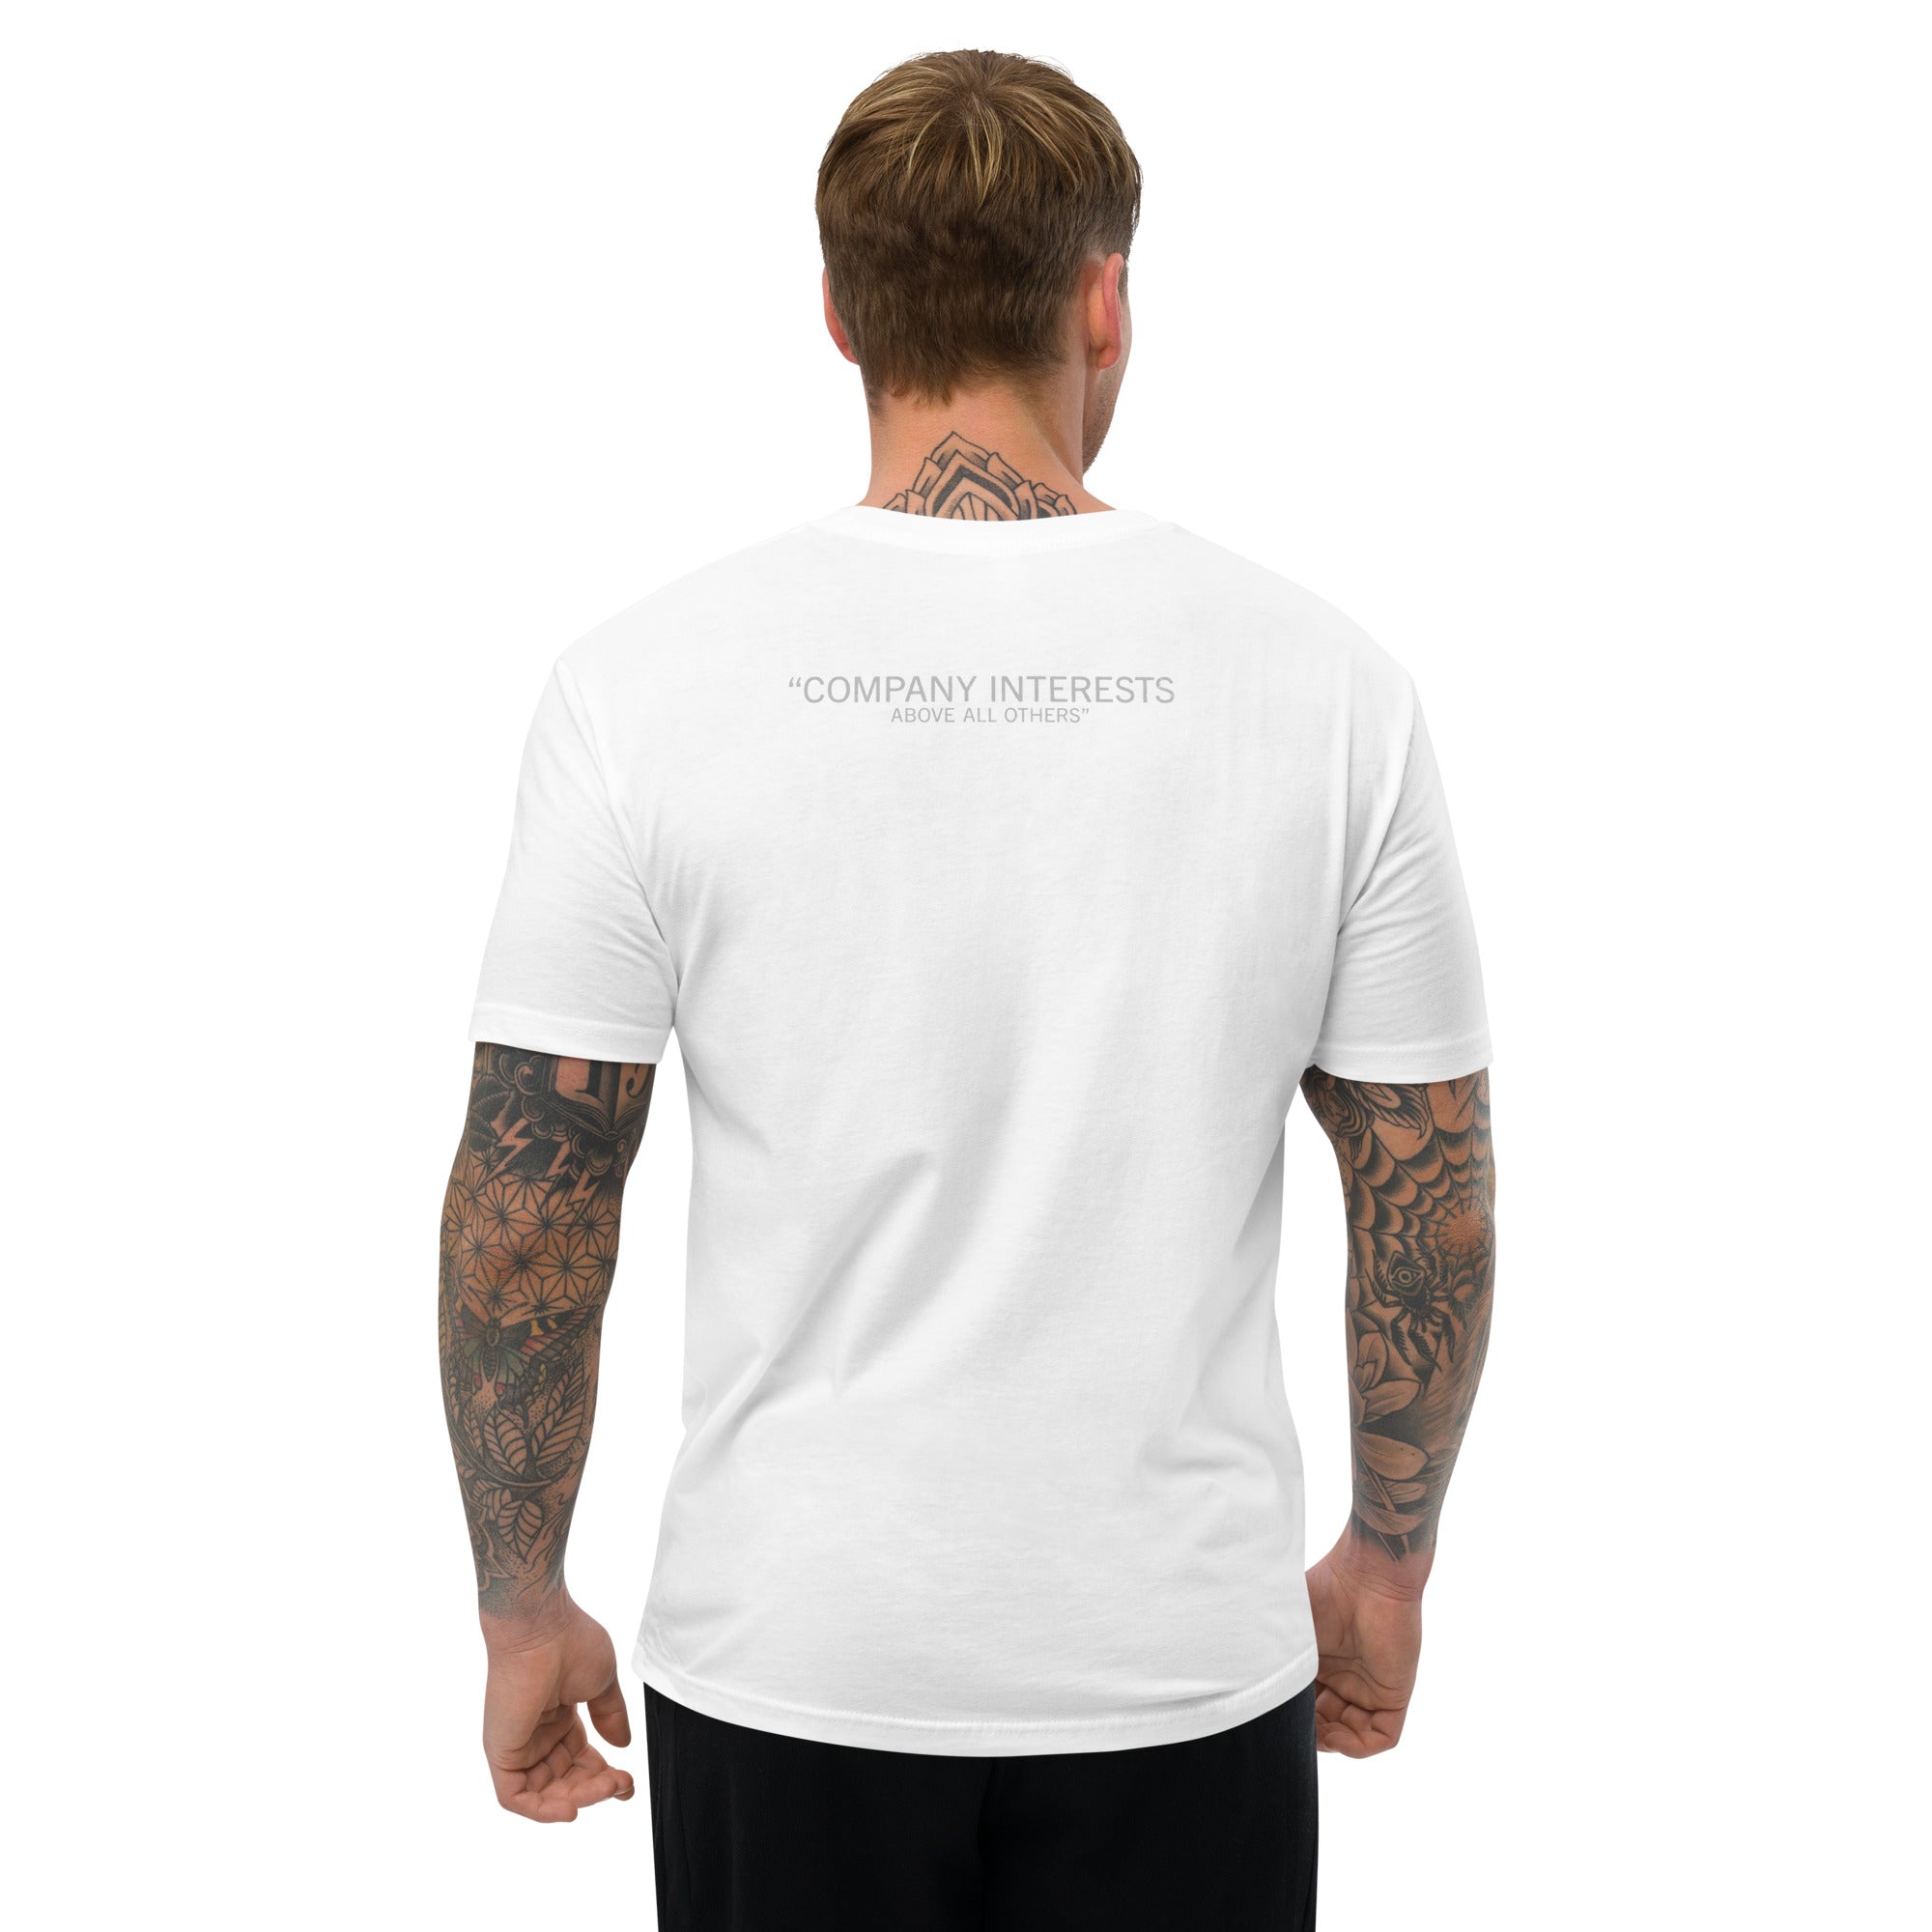 Men's Fitted "Company Interests" Tee